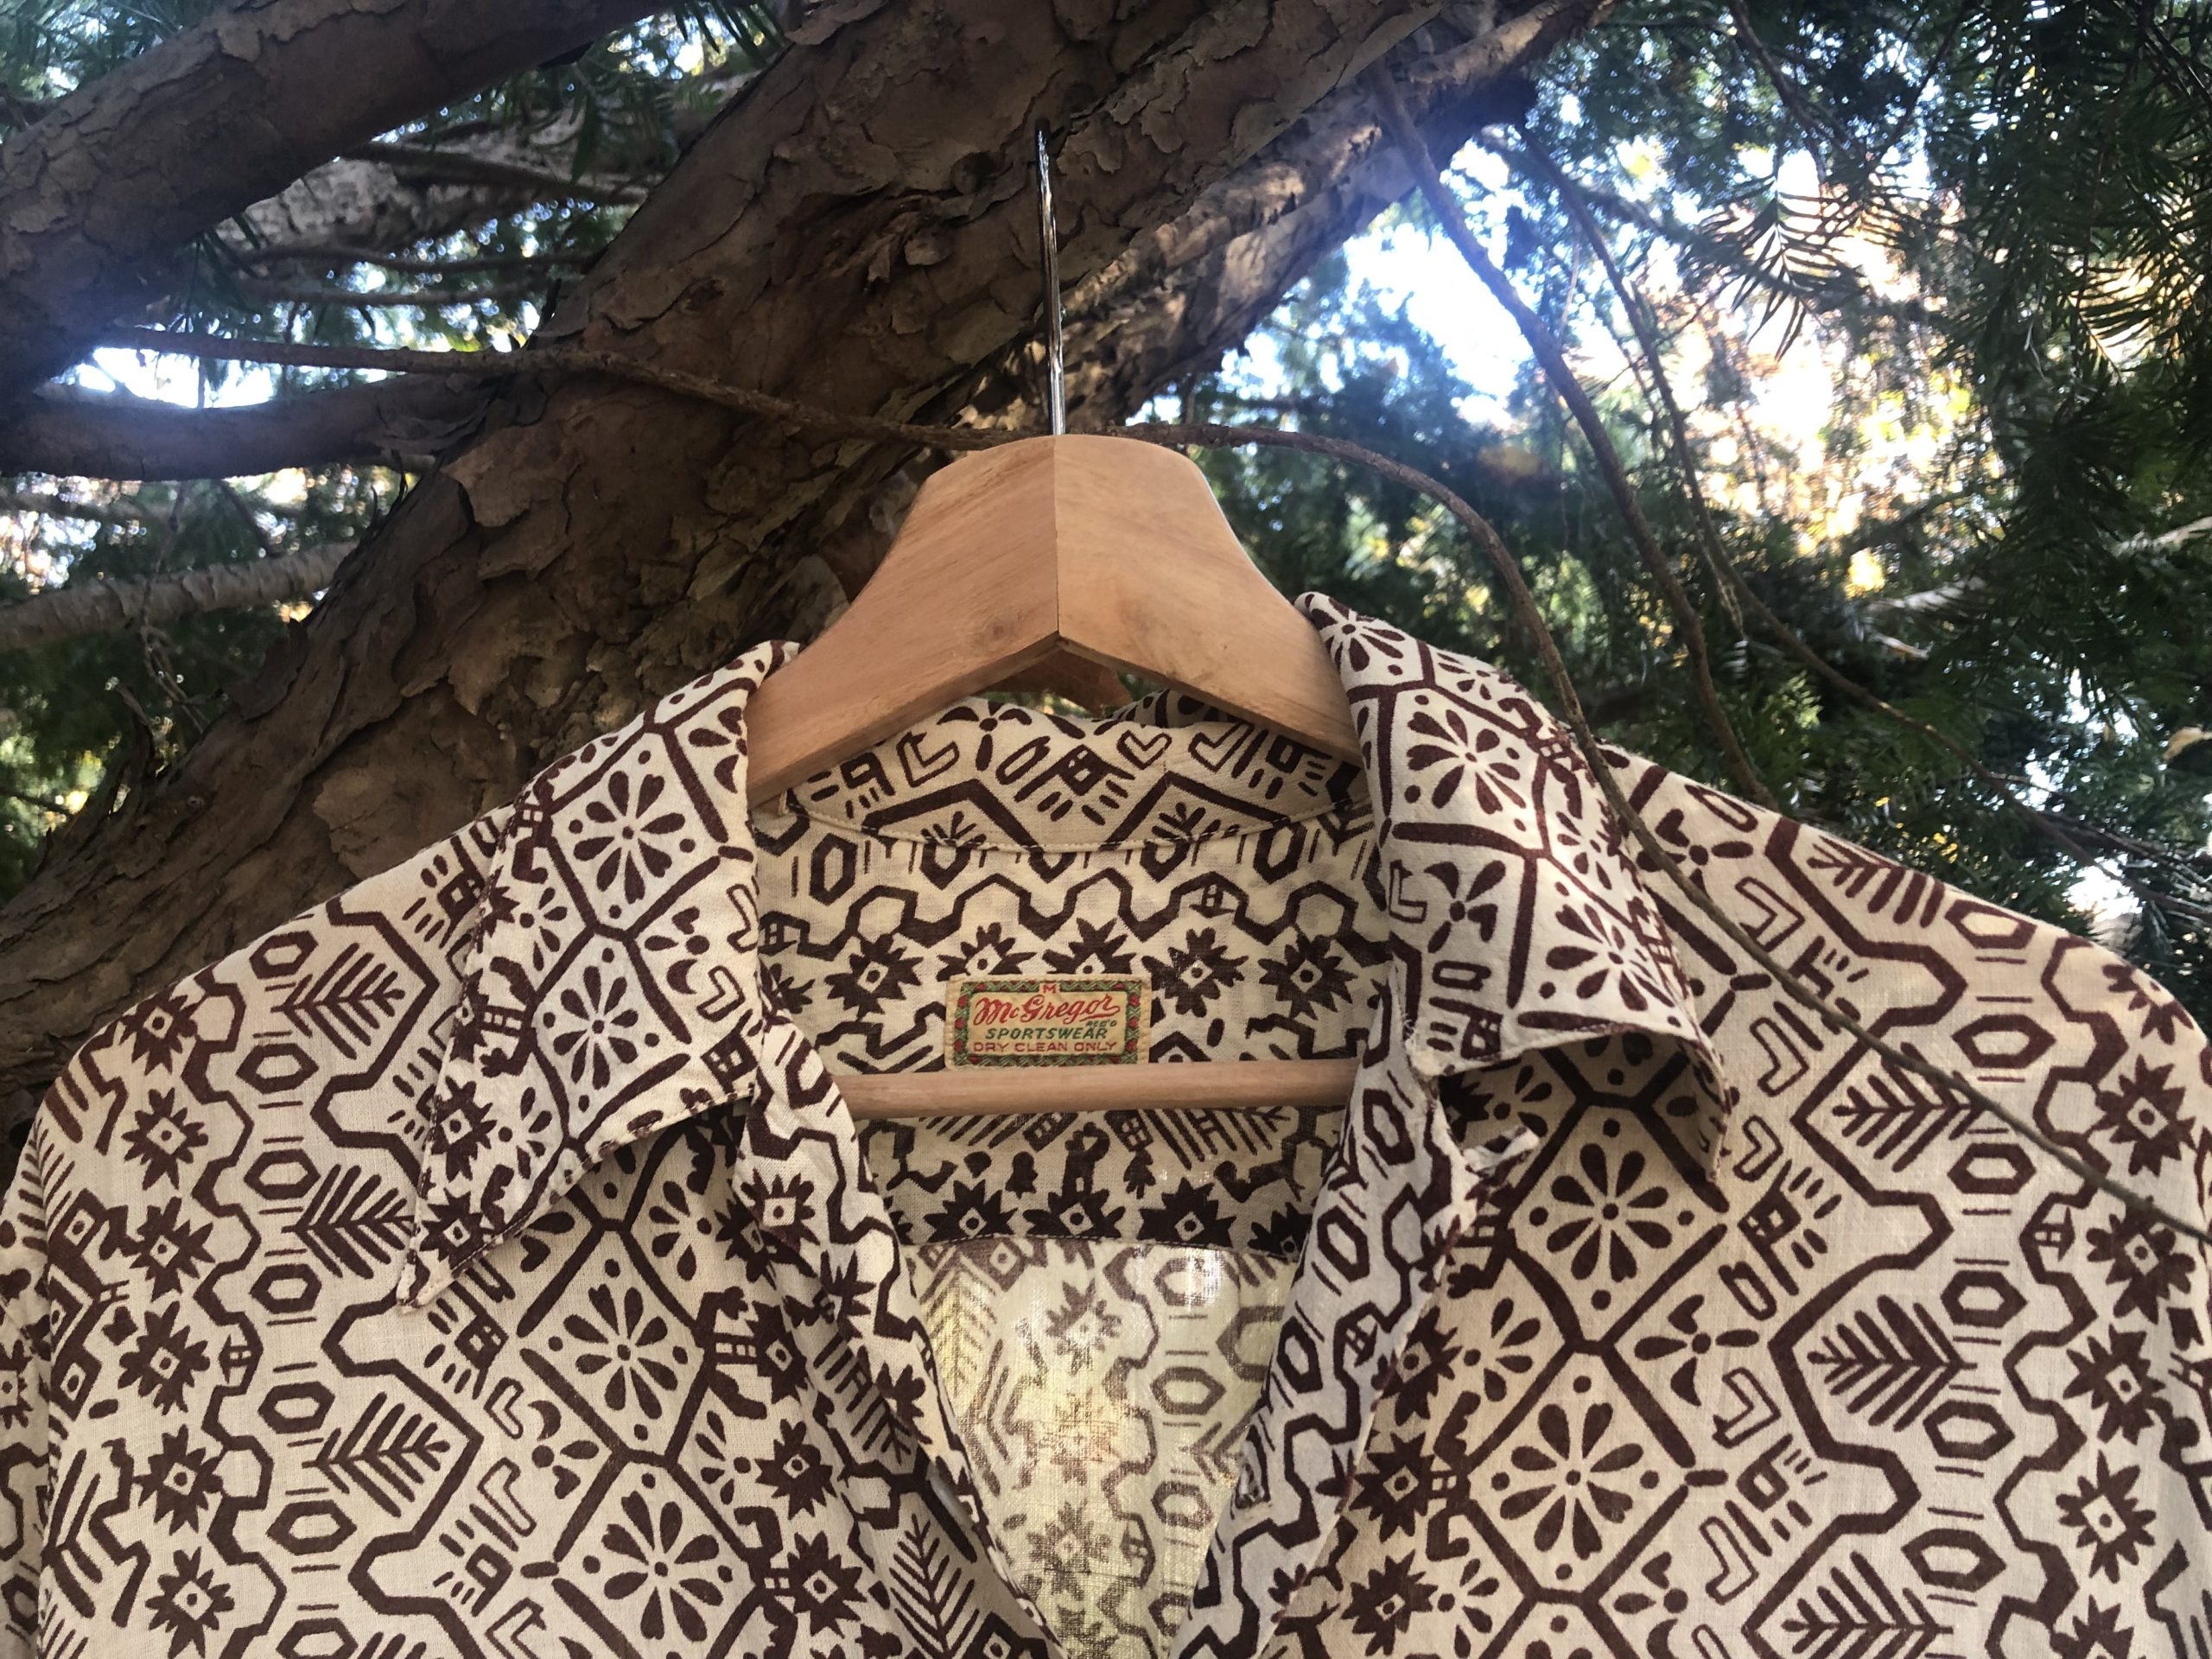 Doubling the life of clothing reduces greenhouse gases by 24 percent. This hand washed, air dried McGregor shirt is still in good shape after 60 years.